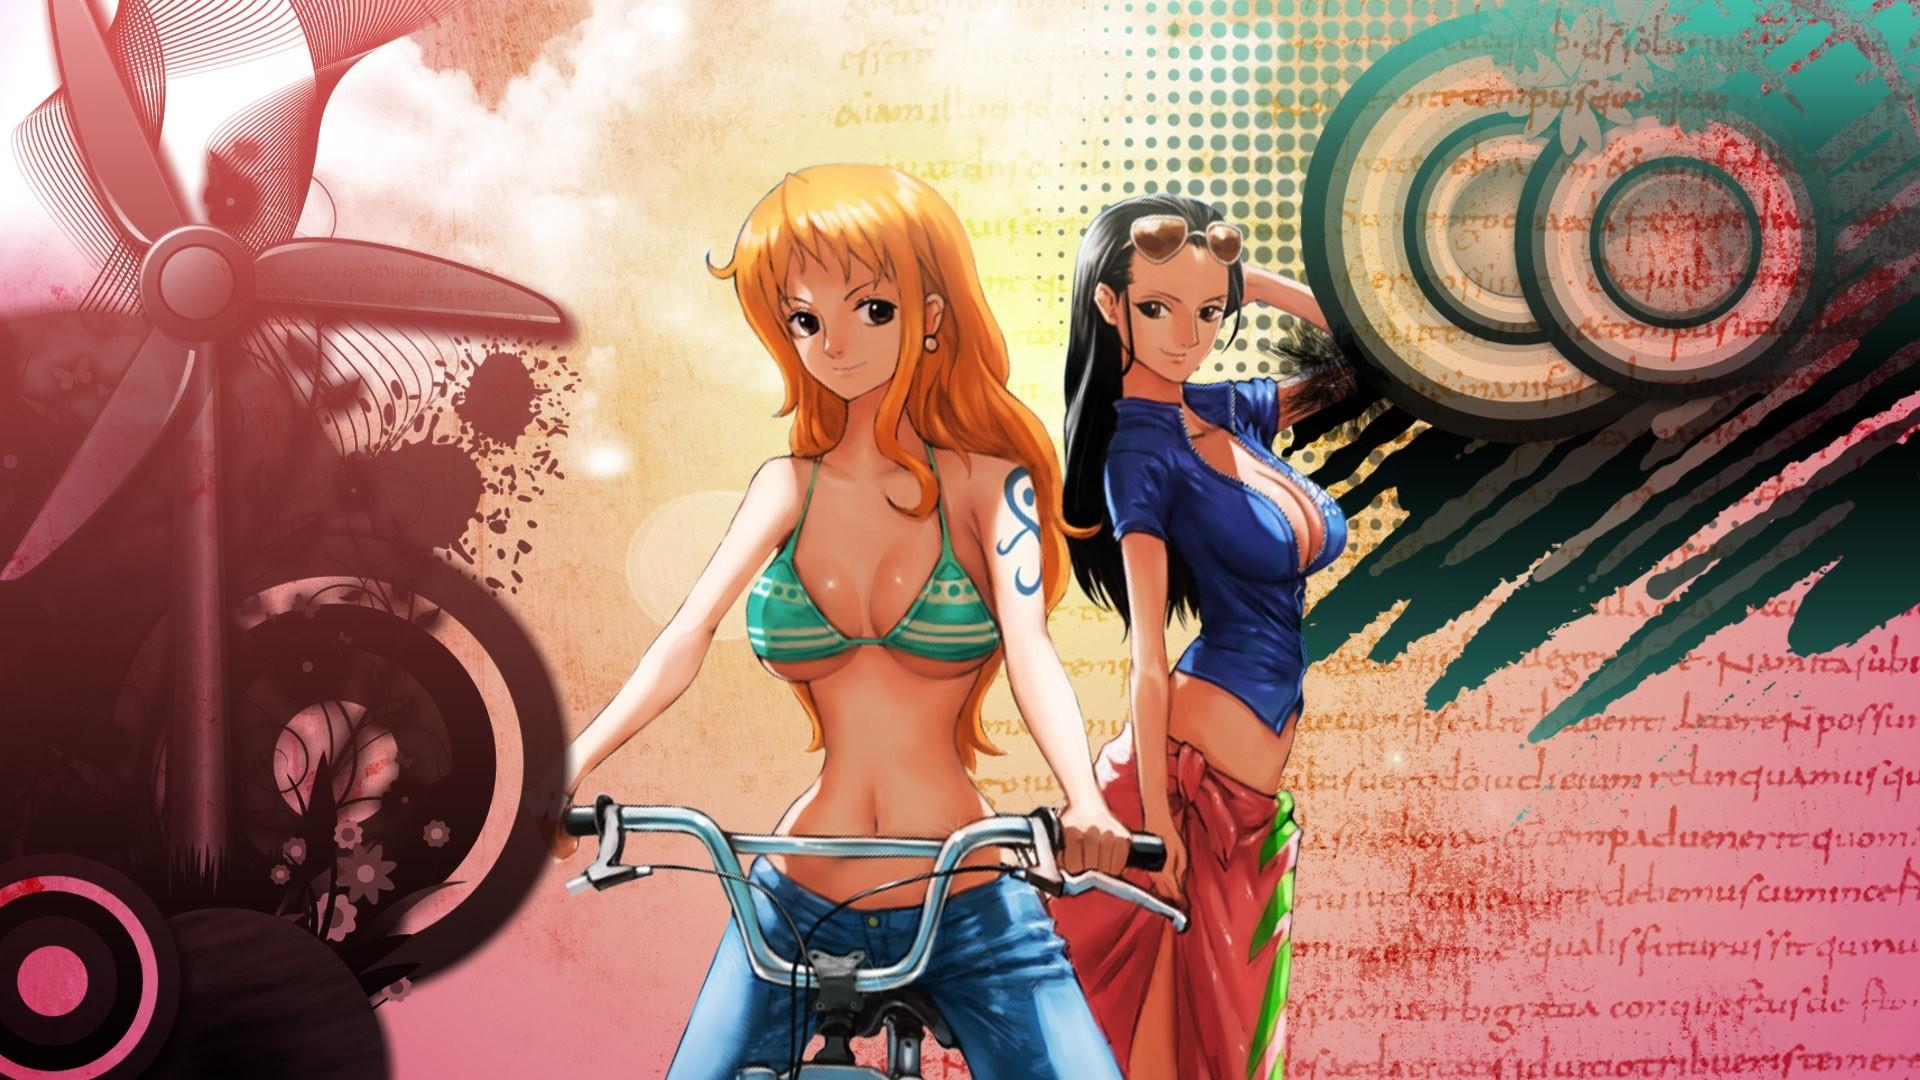 Nami One Piece Wallpapers Wallpaper Cave